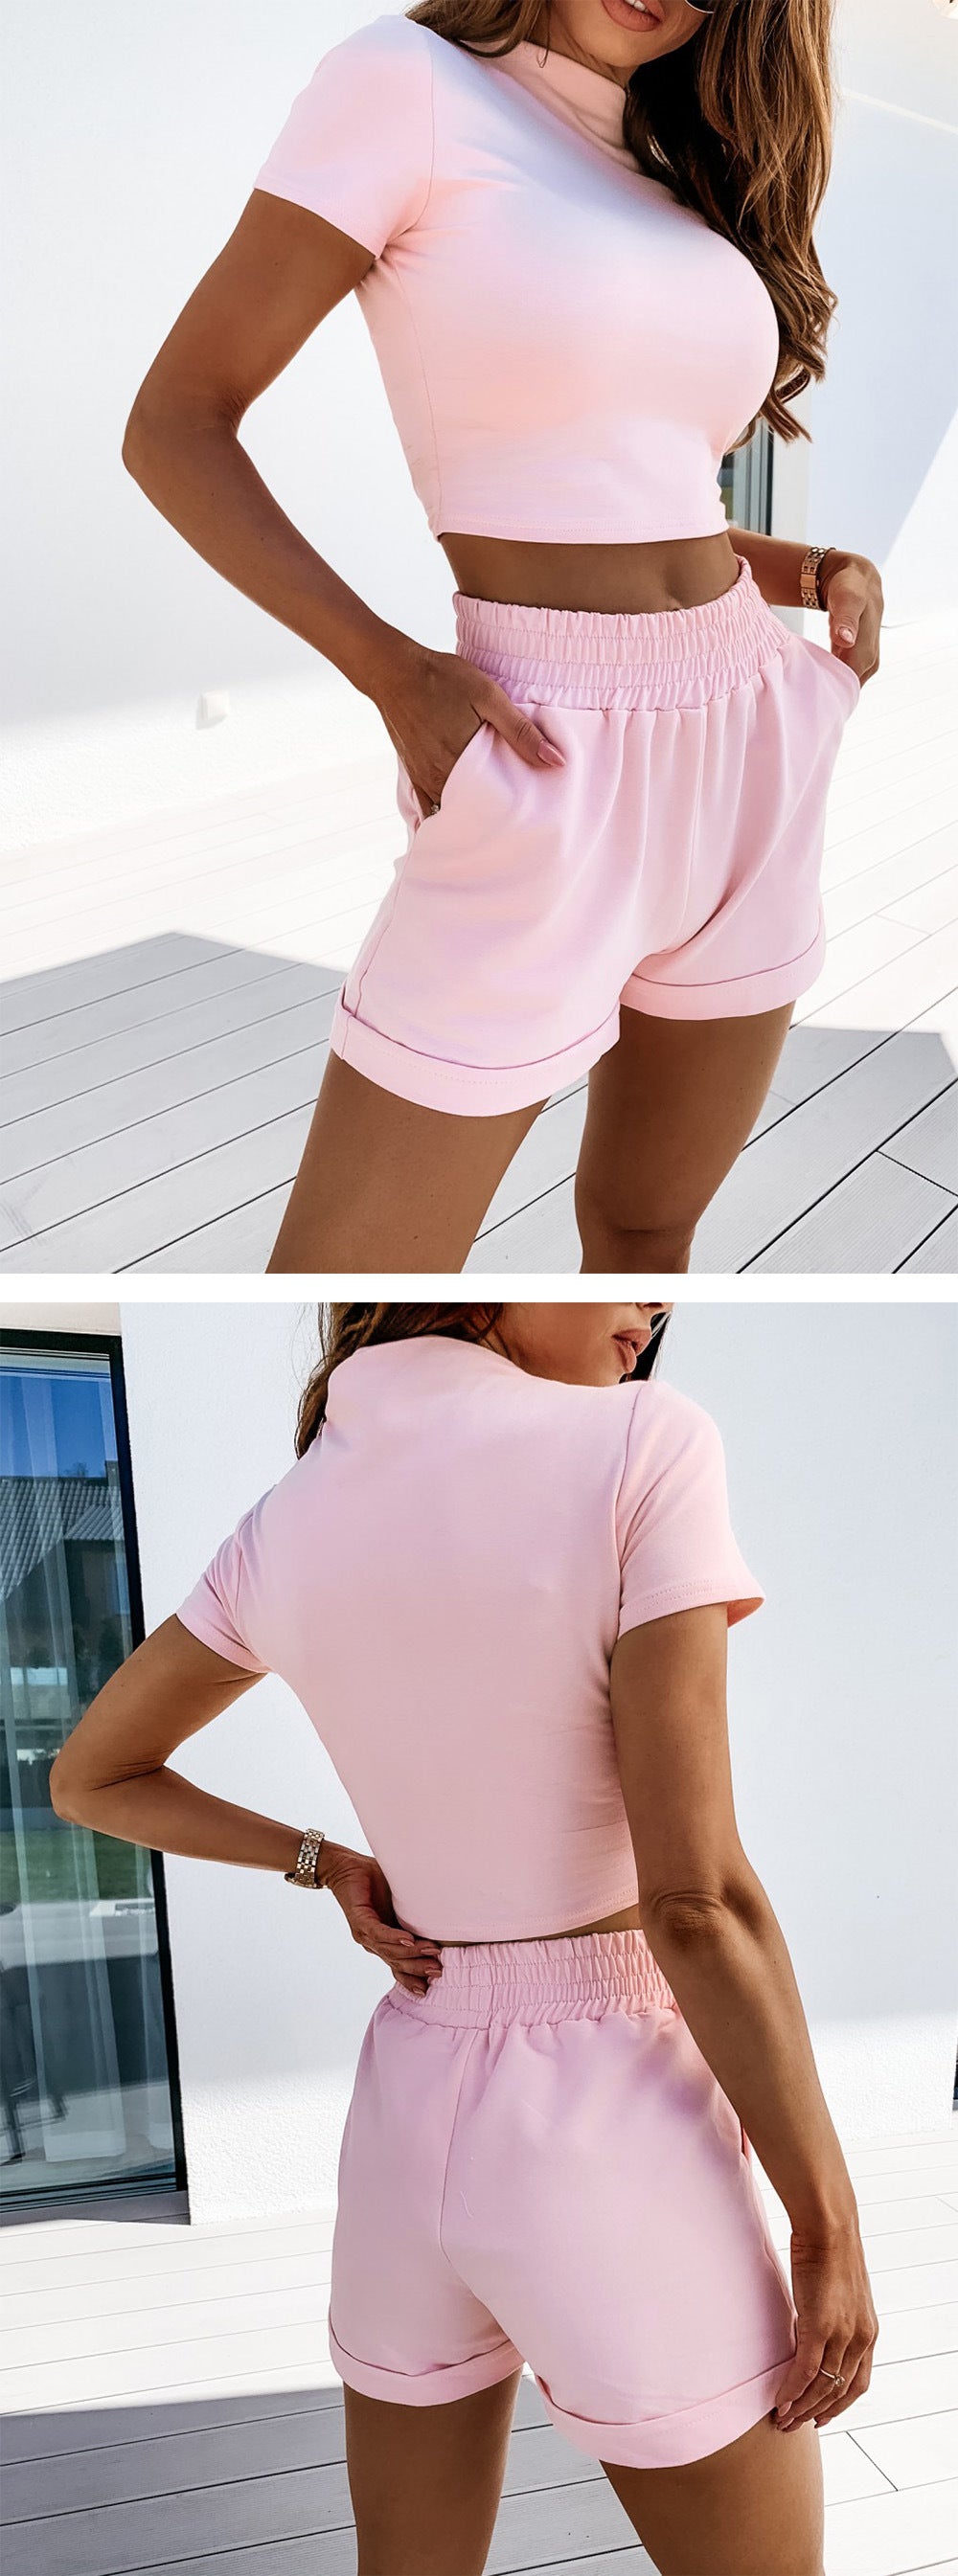 Spring 2022 New Women's Clothing Fashion Suit Two-piece Short Sleeve High Waist Cropped Shorts